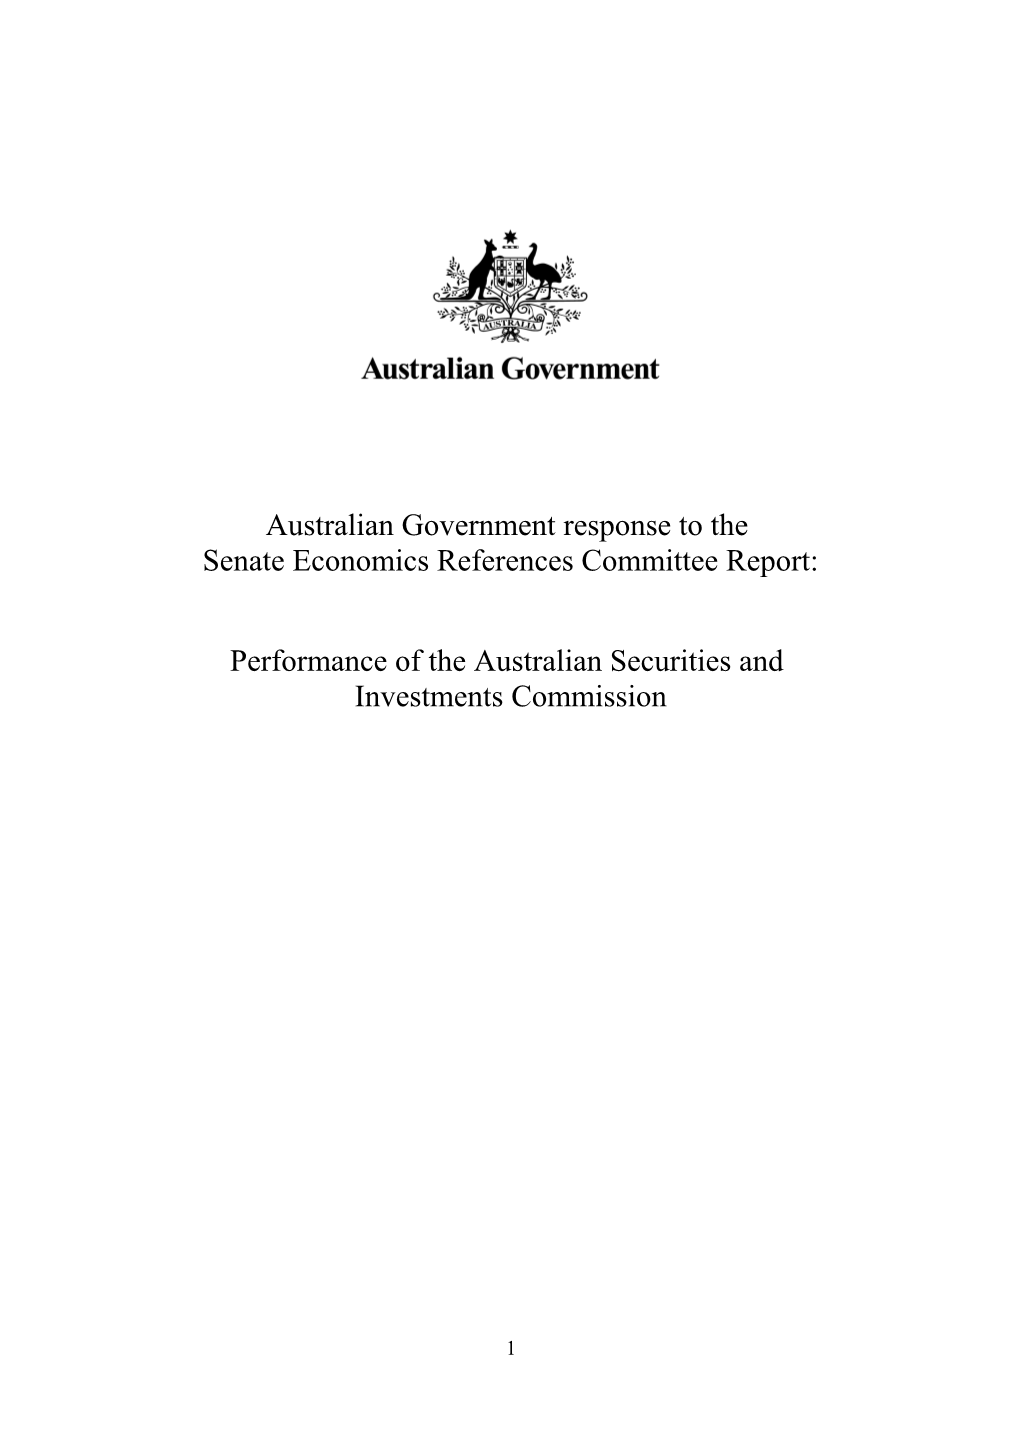 Government Response - Performance of the Australian Securities and Investments Commission